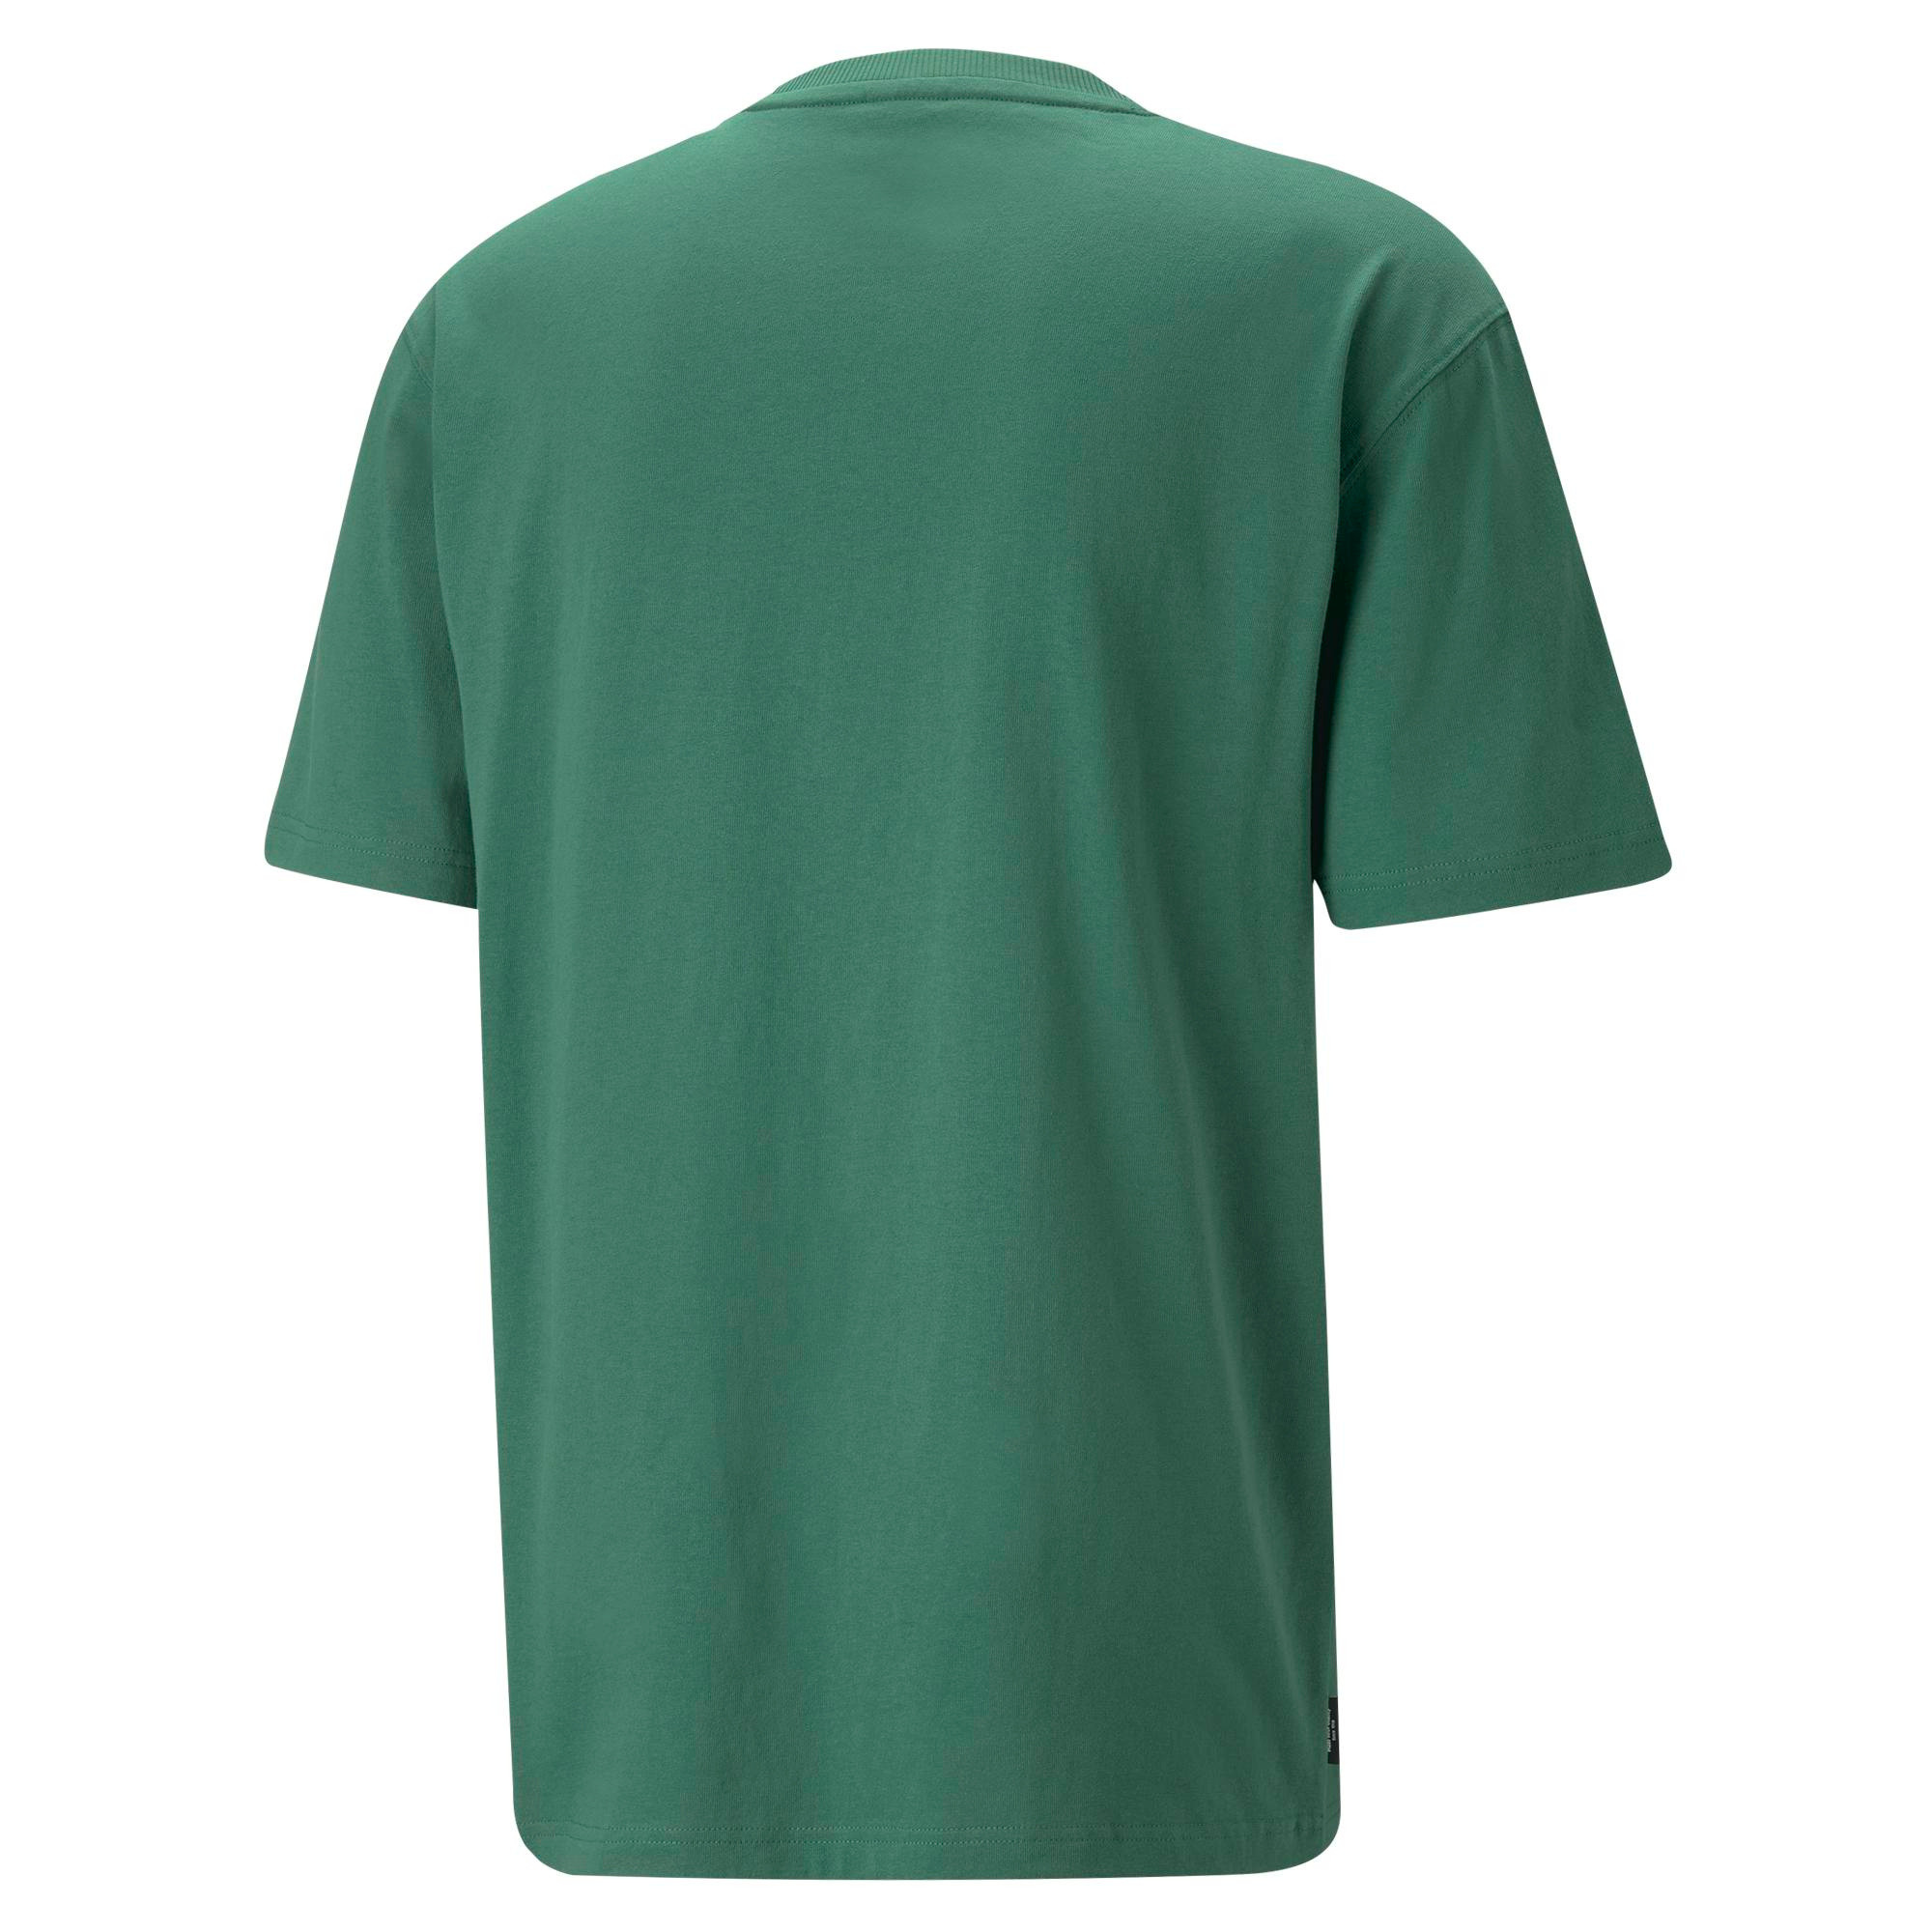 Puma - Cotton T-shirt with logo, Green, large image number 1